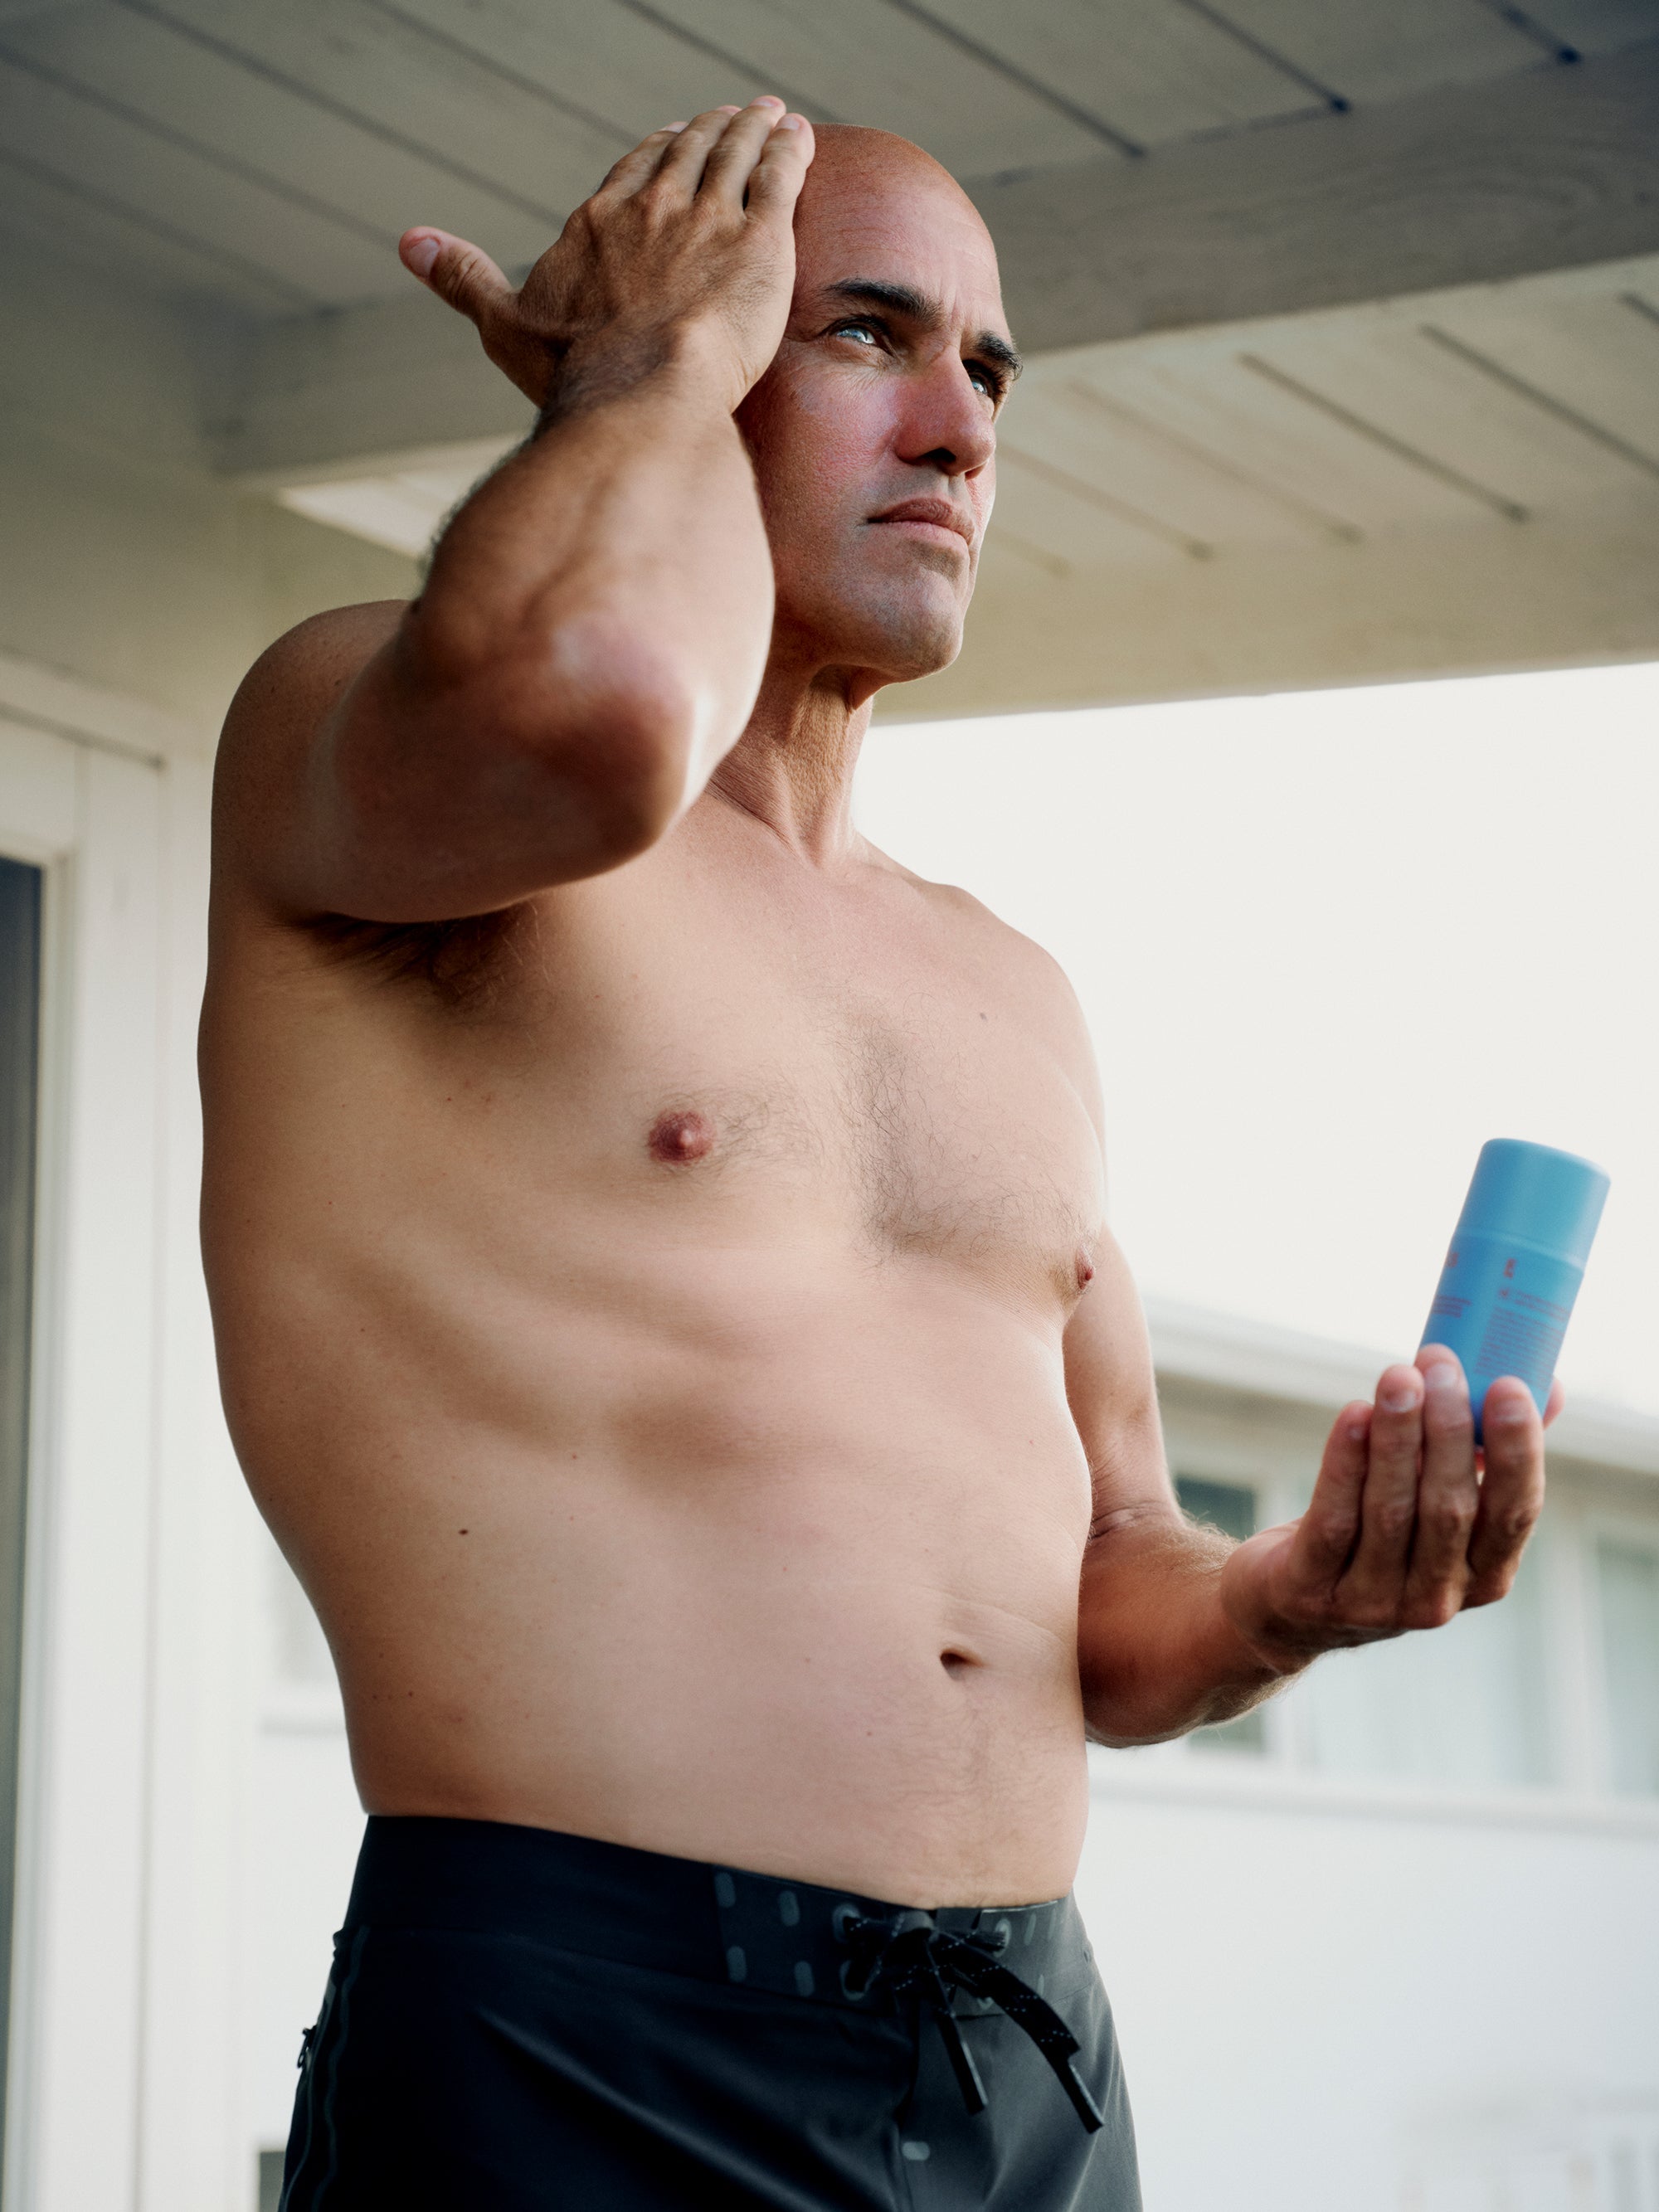 A shirtless man with a serious expression stands under a wooden roof, applying a product to his face with his right hand while holding a blue container in his left hand. He has short hair and wears dark shorts. In the background, there is a white building.